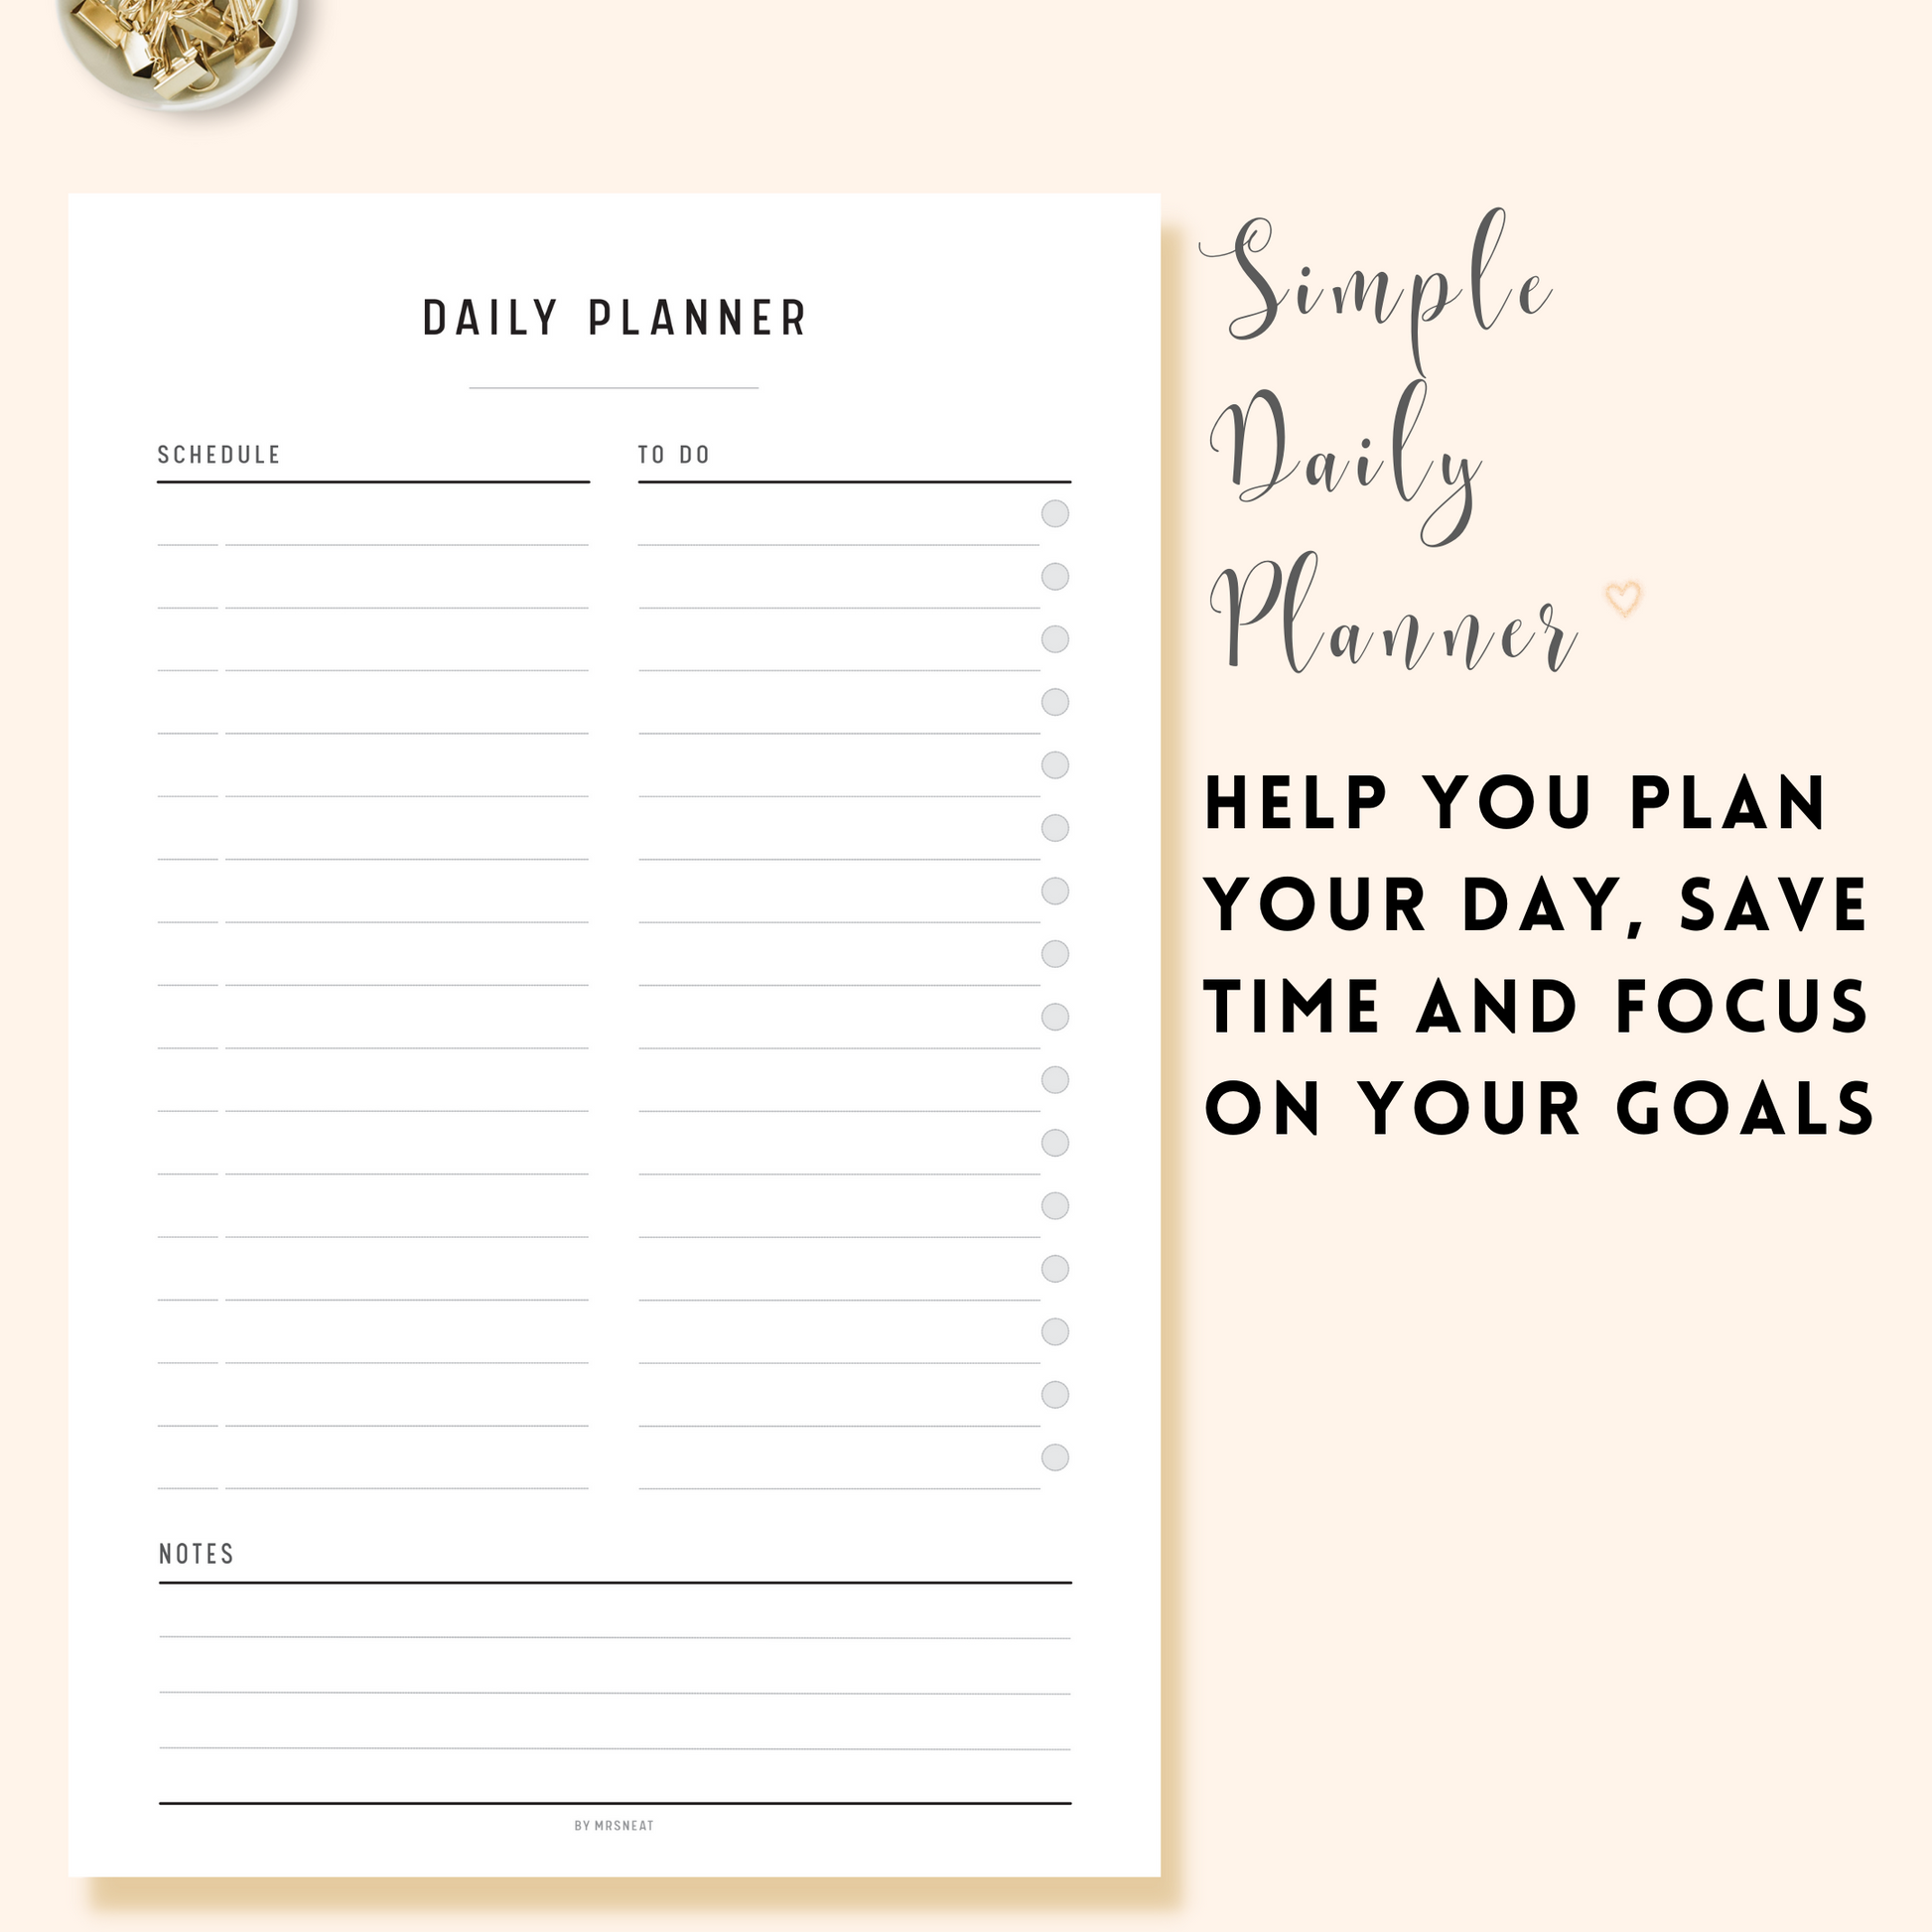 Simple Daily Planner Printable in Cute and Minimalist Design